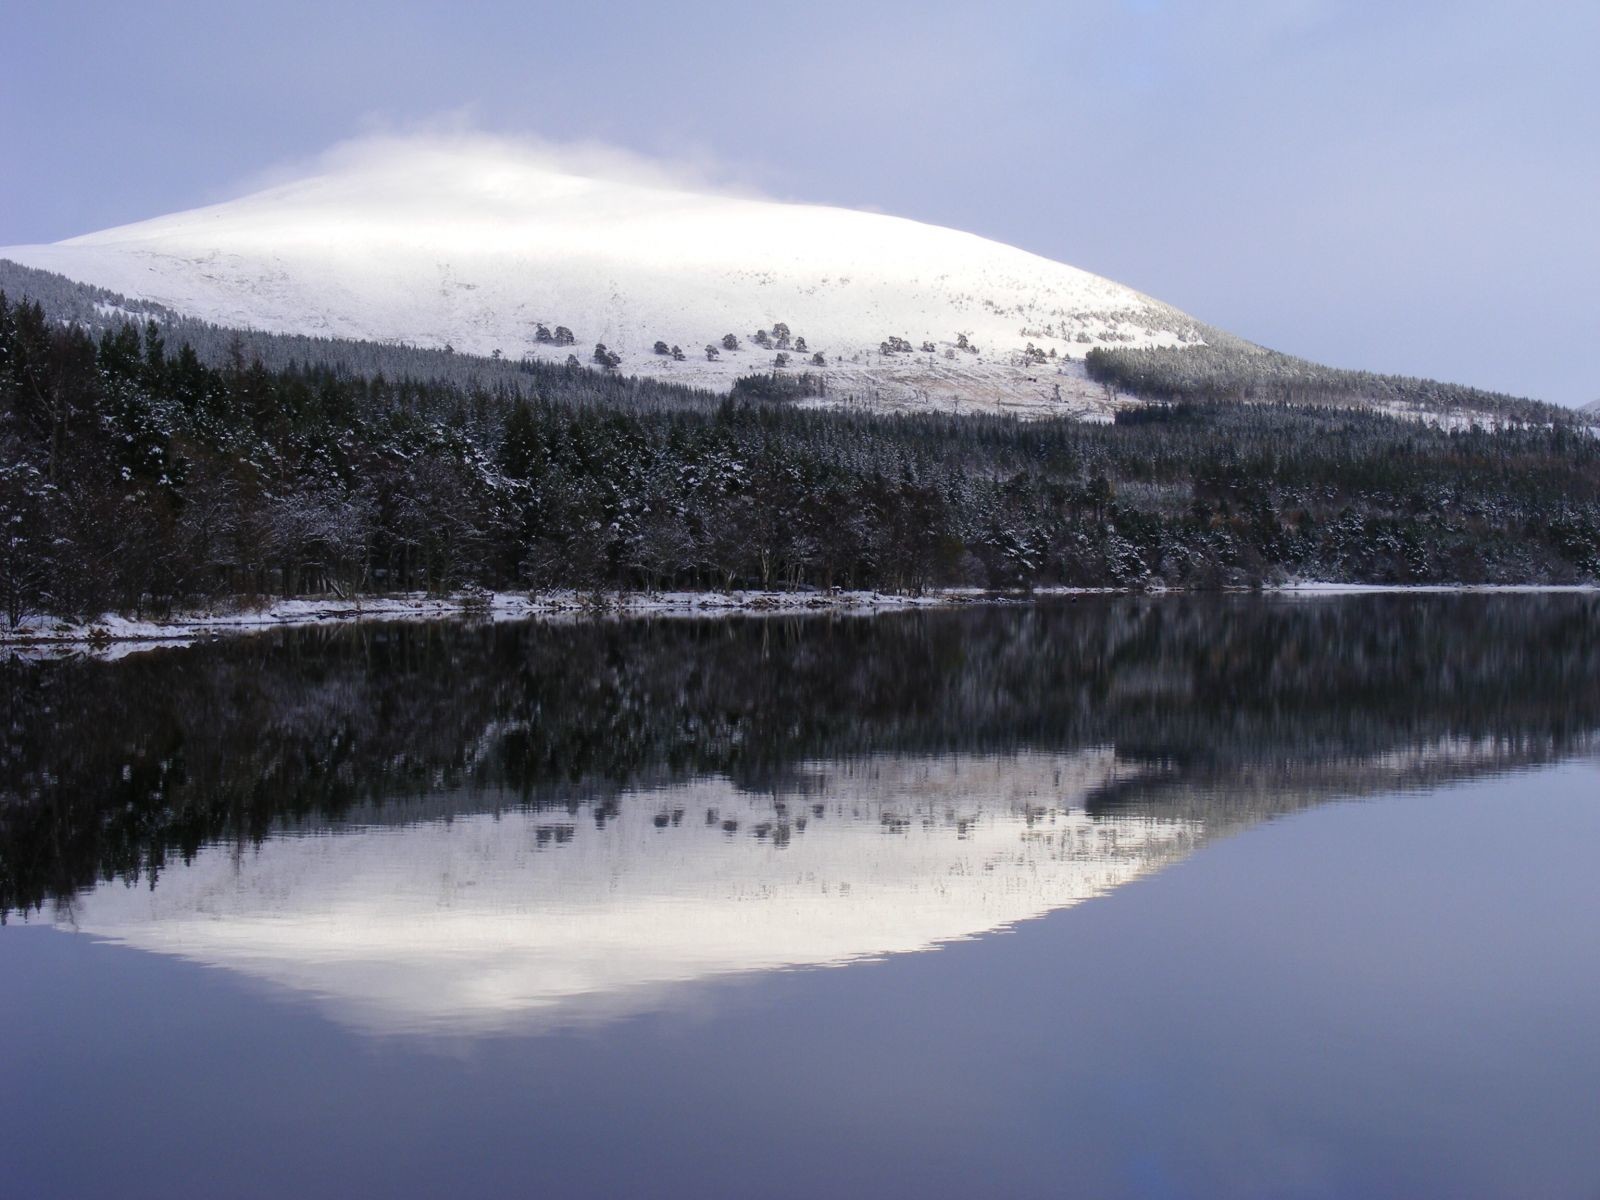 Reflection on Loch Morlich at the base of the Cairngorms